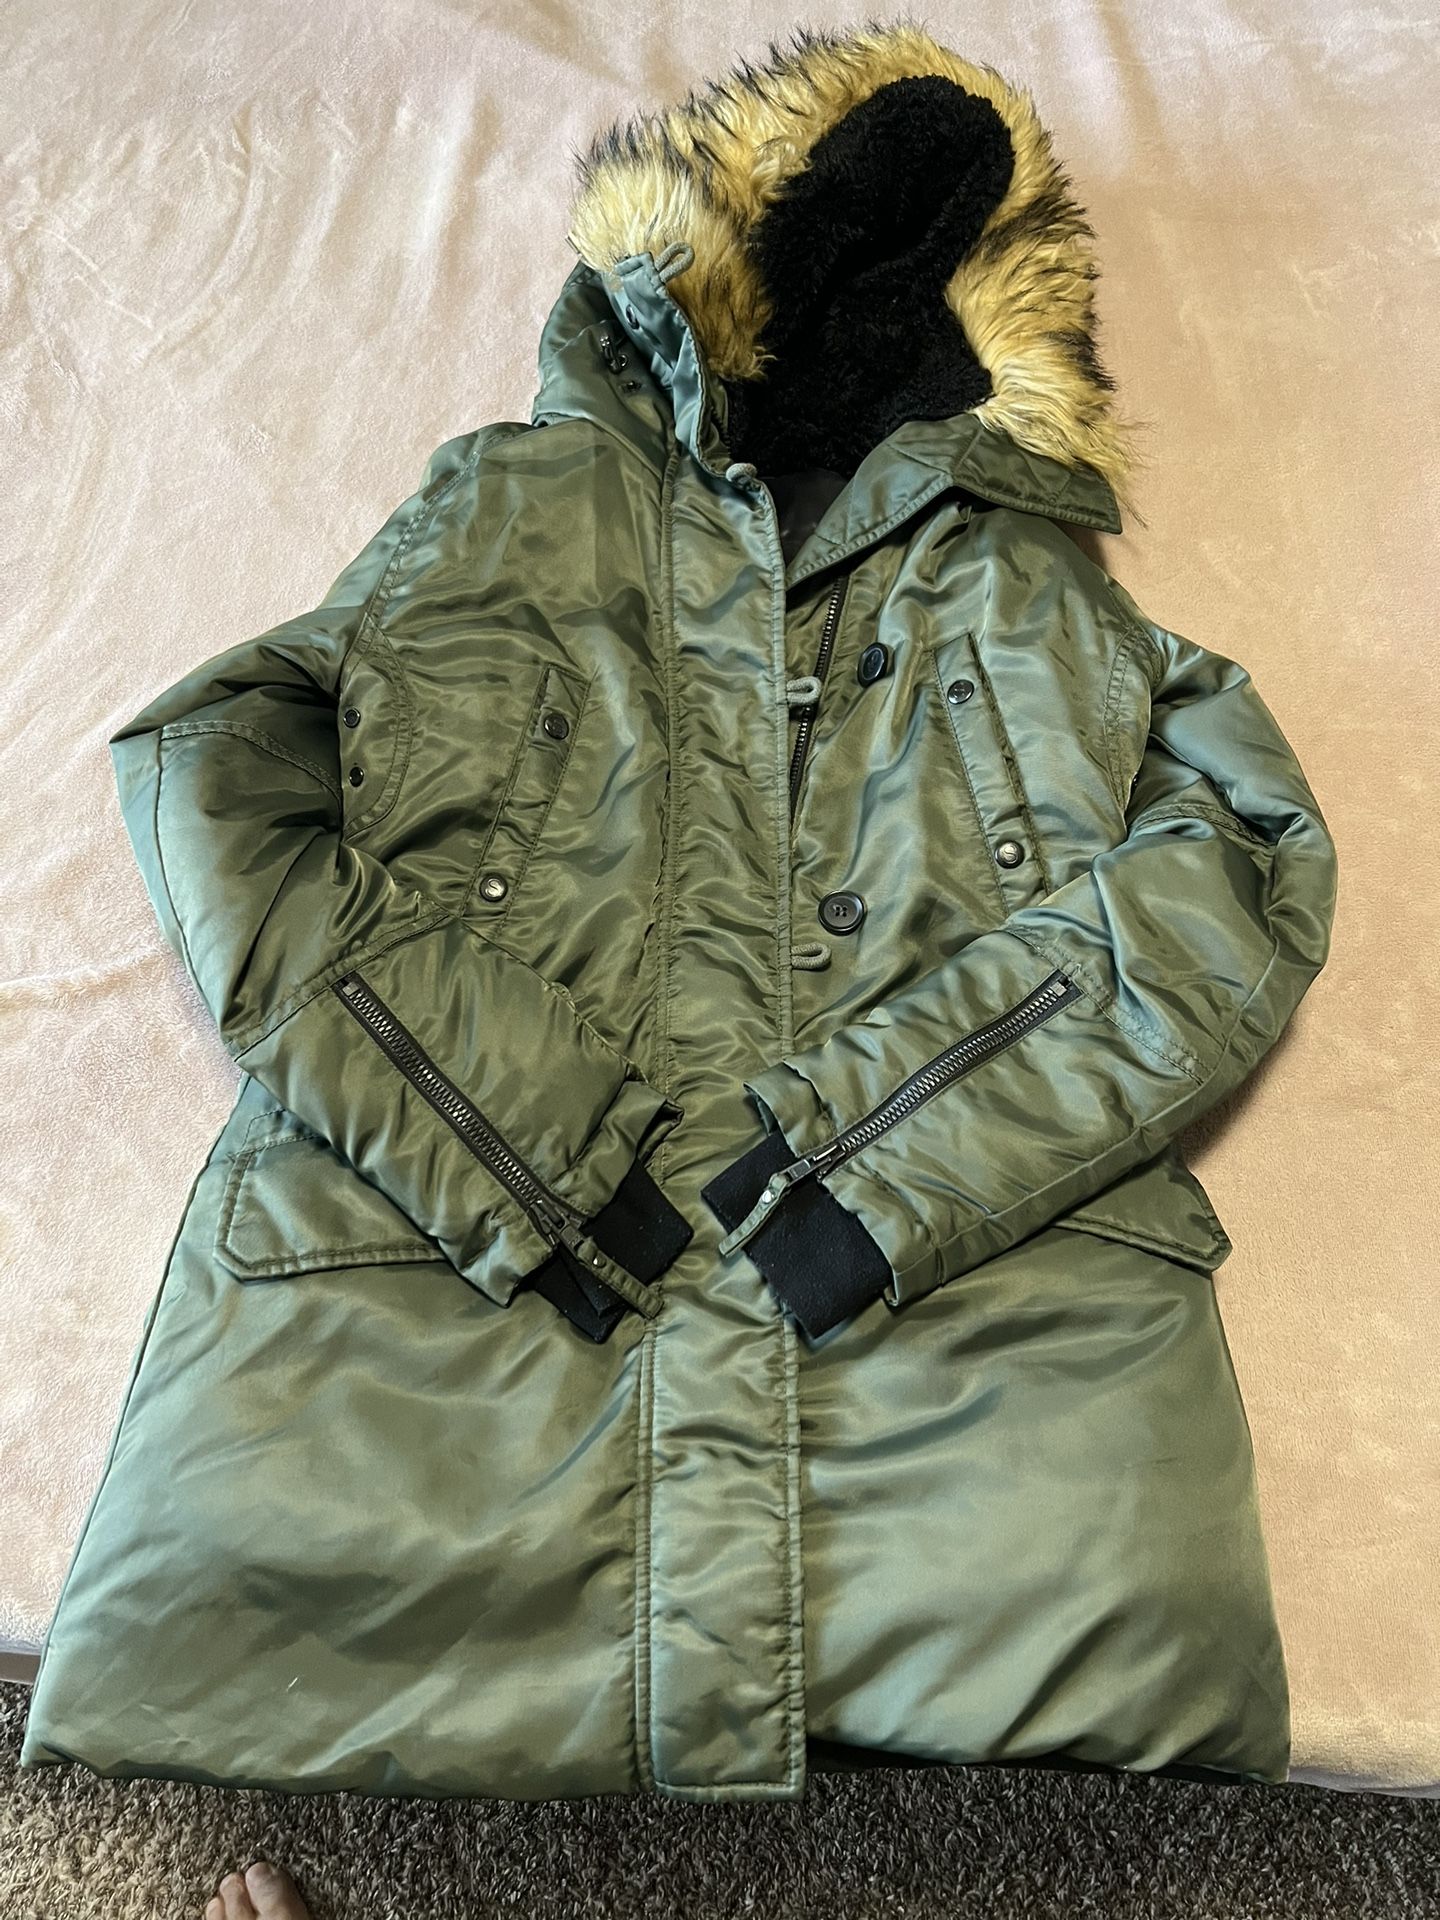 S13 New York… Green parka jacket with duck down. Size M